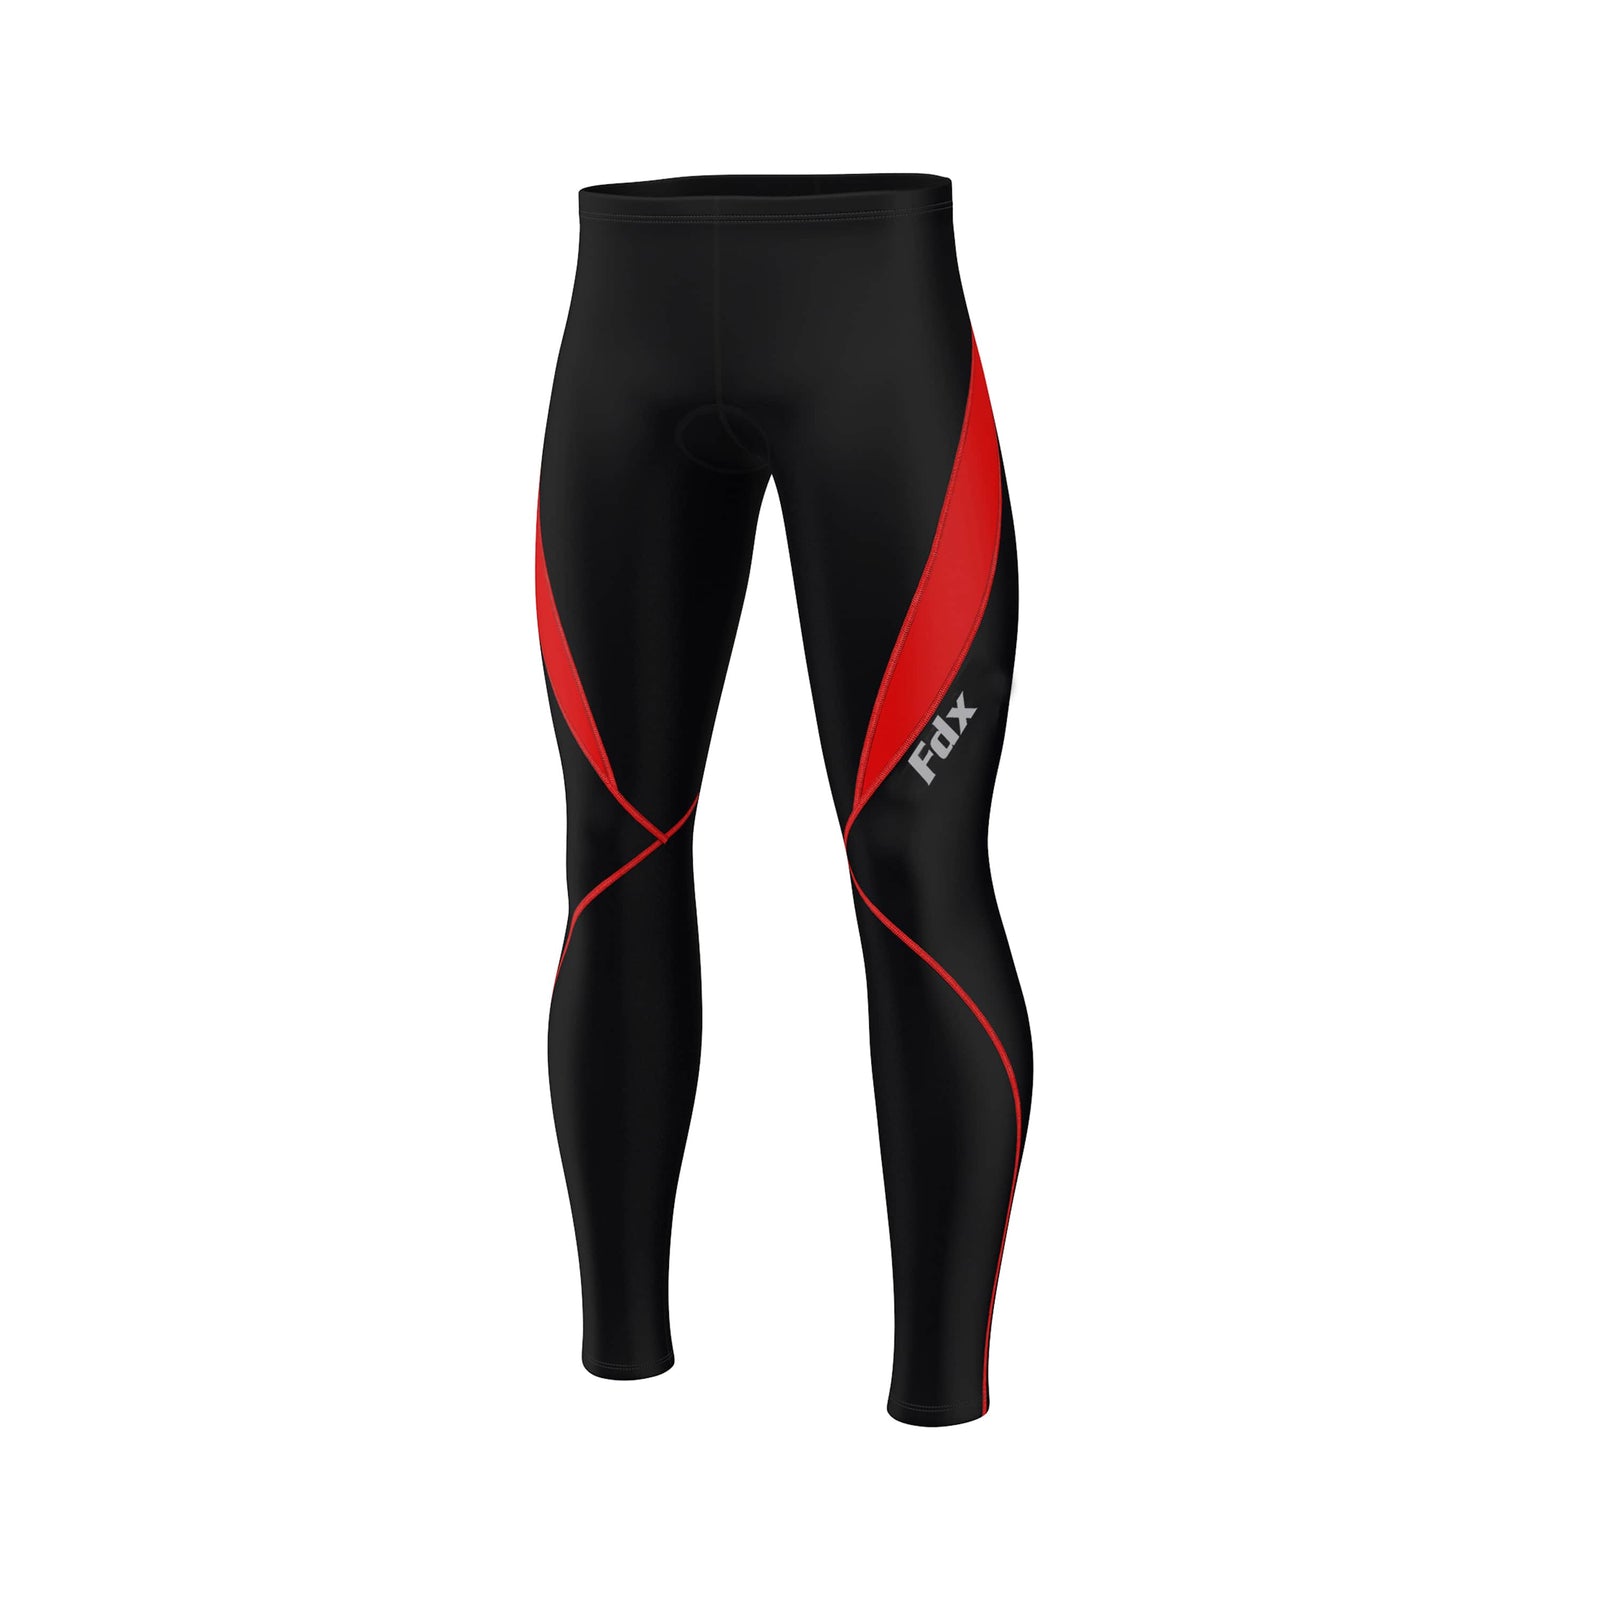 Buy Fdx Men's Thermal Winter Cycling Tights | FDX Sports®